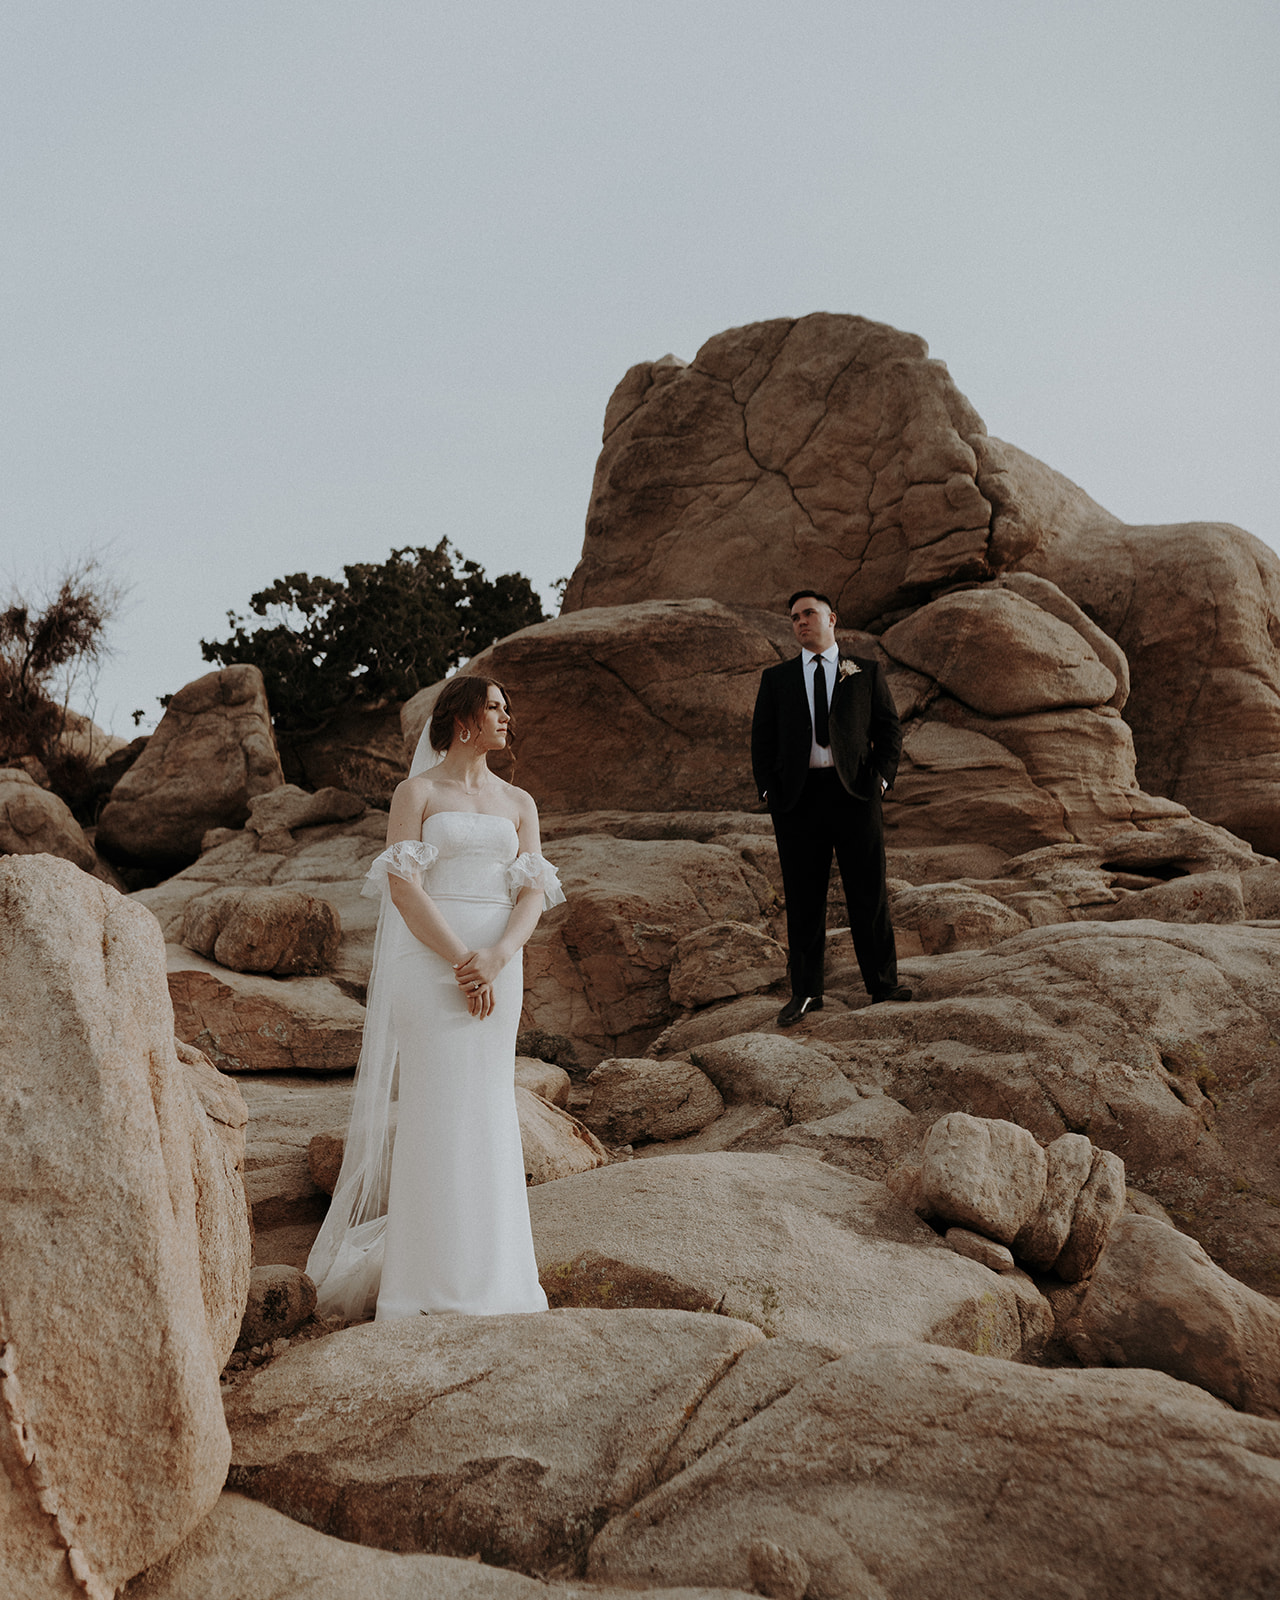 A wedding couple in Joshua Tree National Park standing apart and staggered on a rock formation.